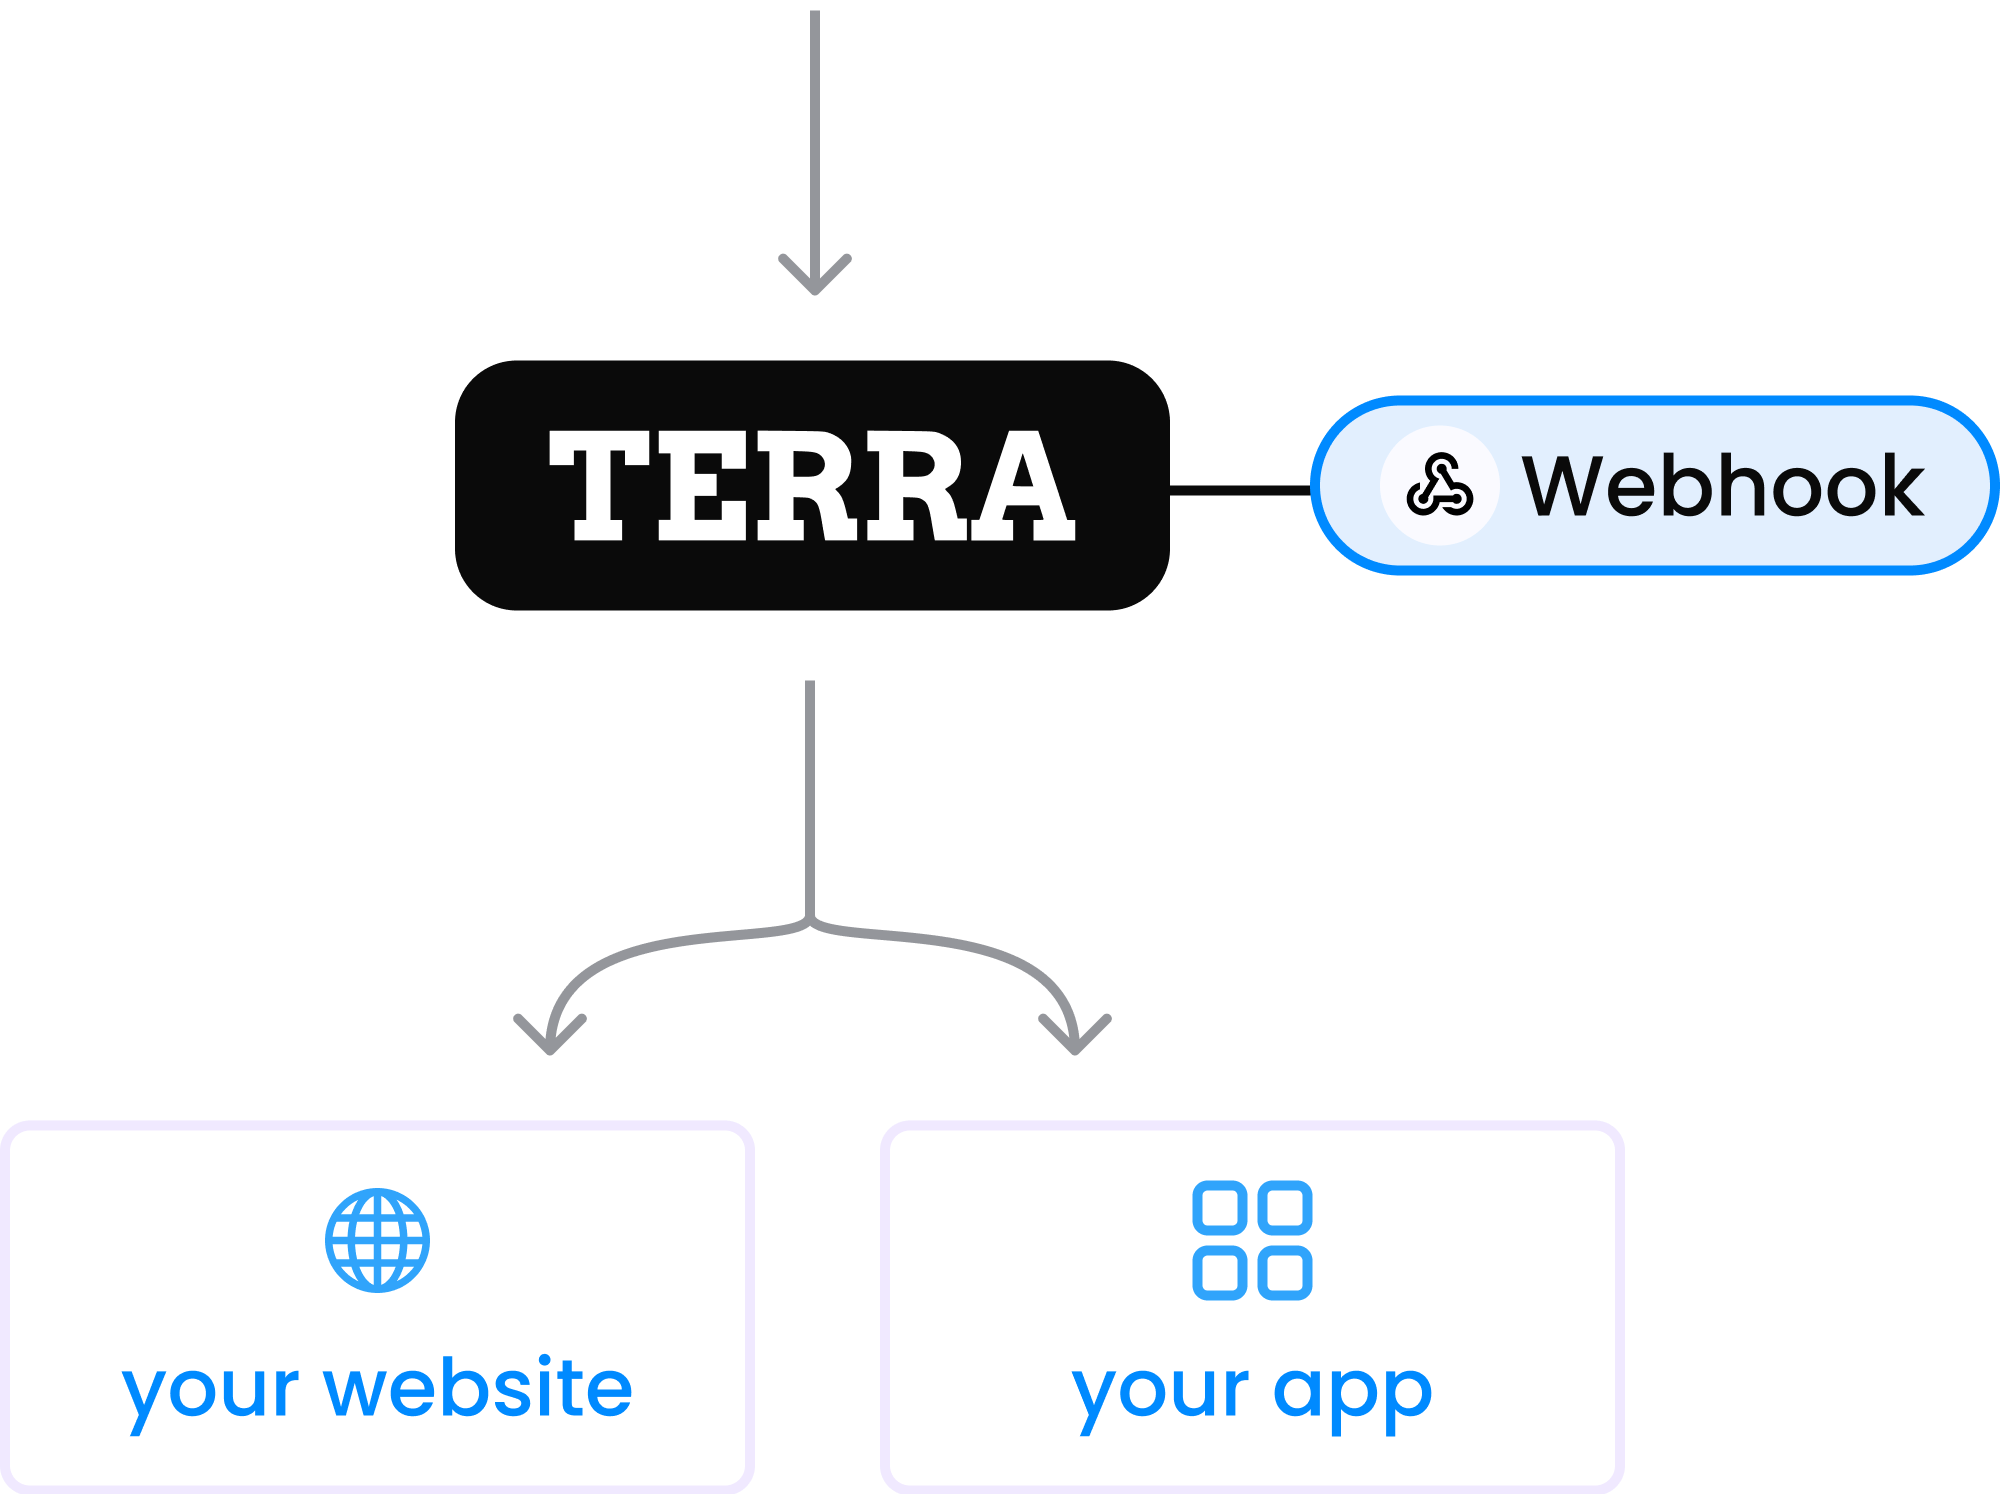 receiving data from wger integration via webhooks to your app or website